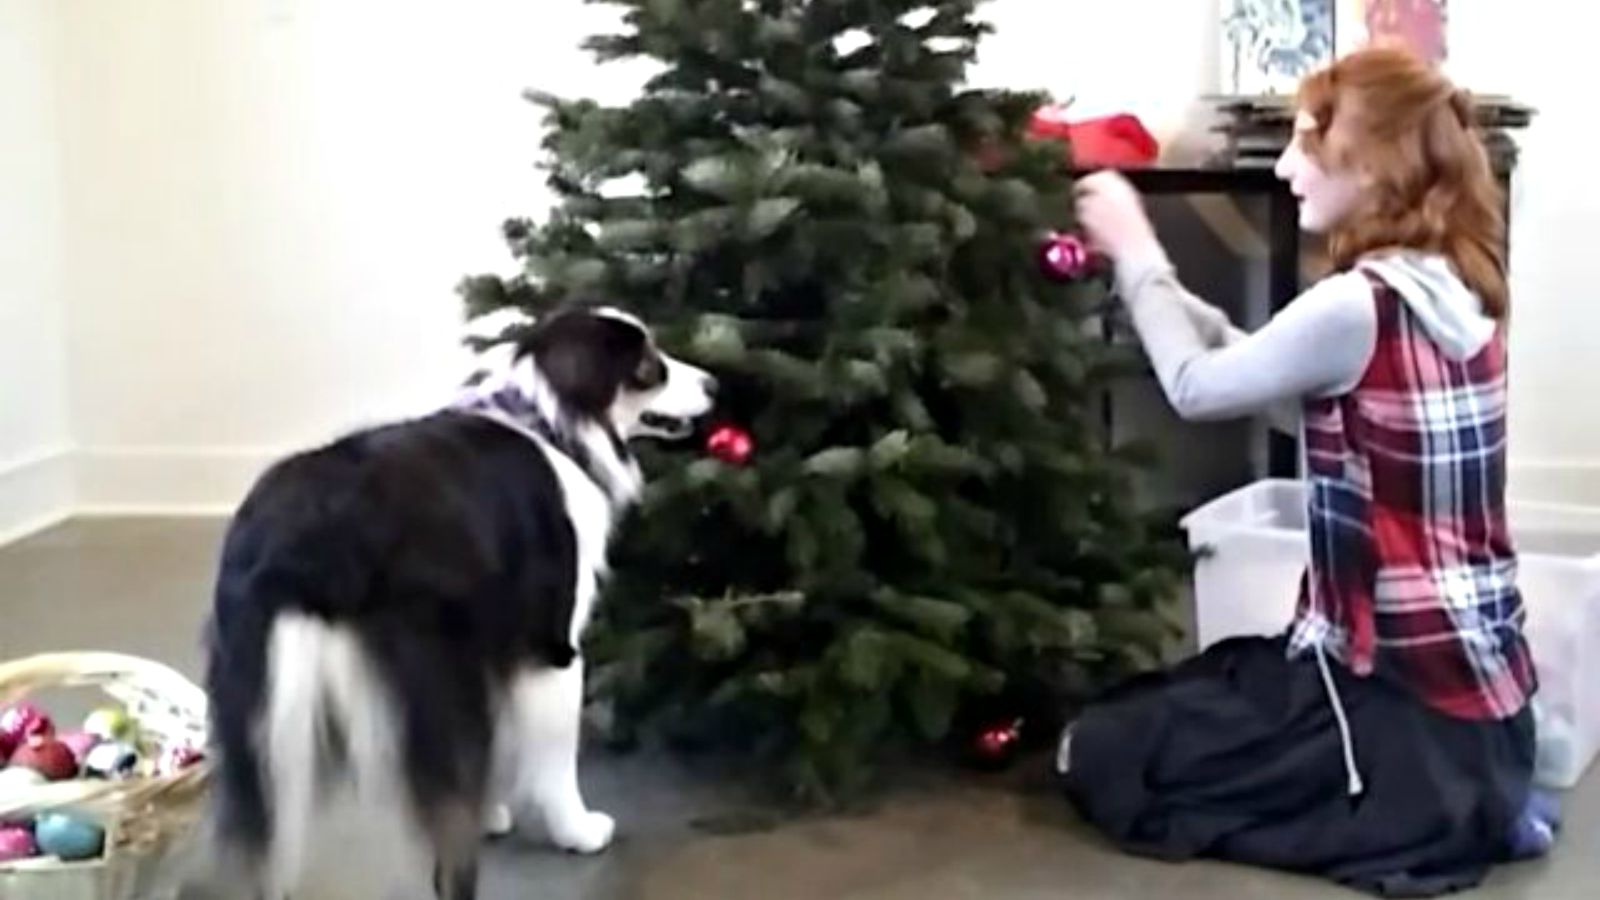 This Dog Helping Set Up the Christmas Tree with His Human Is the Sweetest Thing Ever!